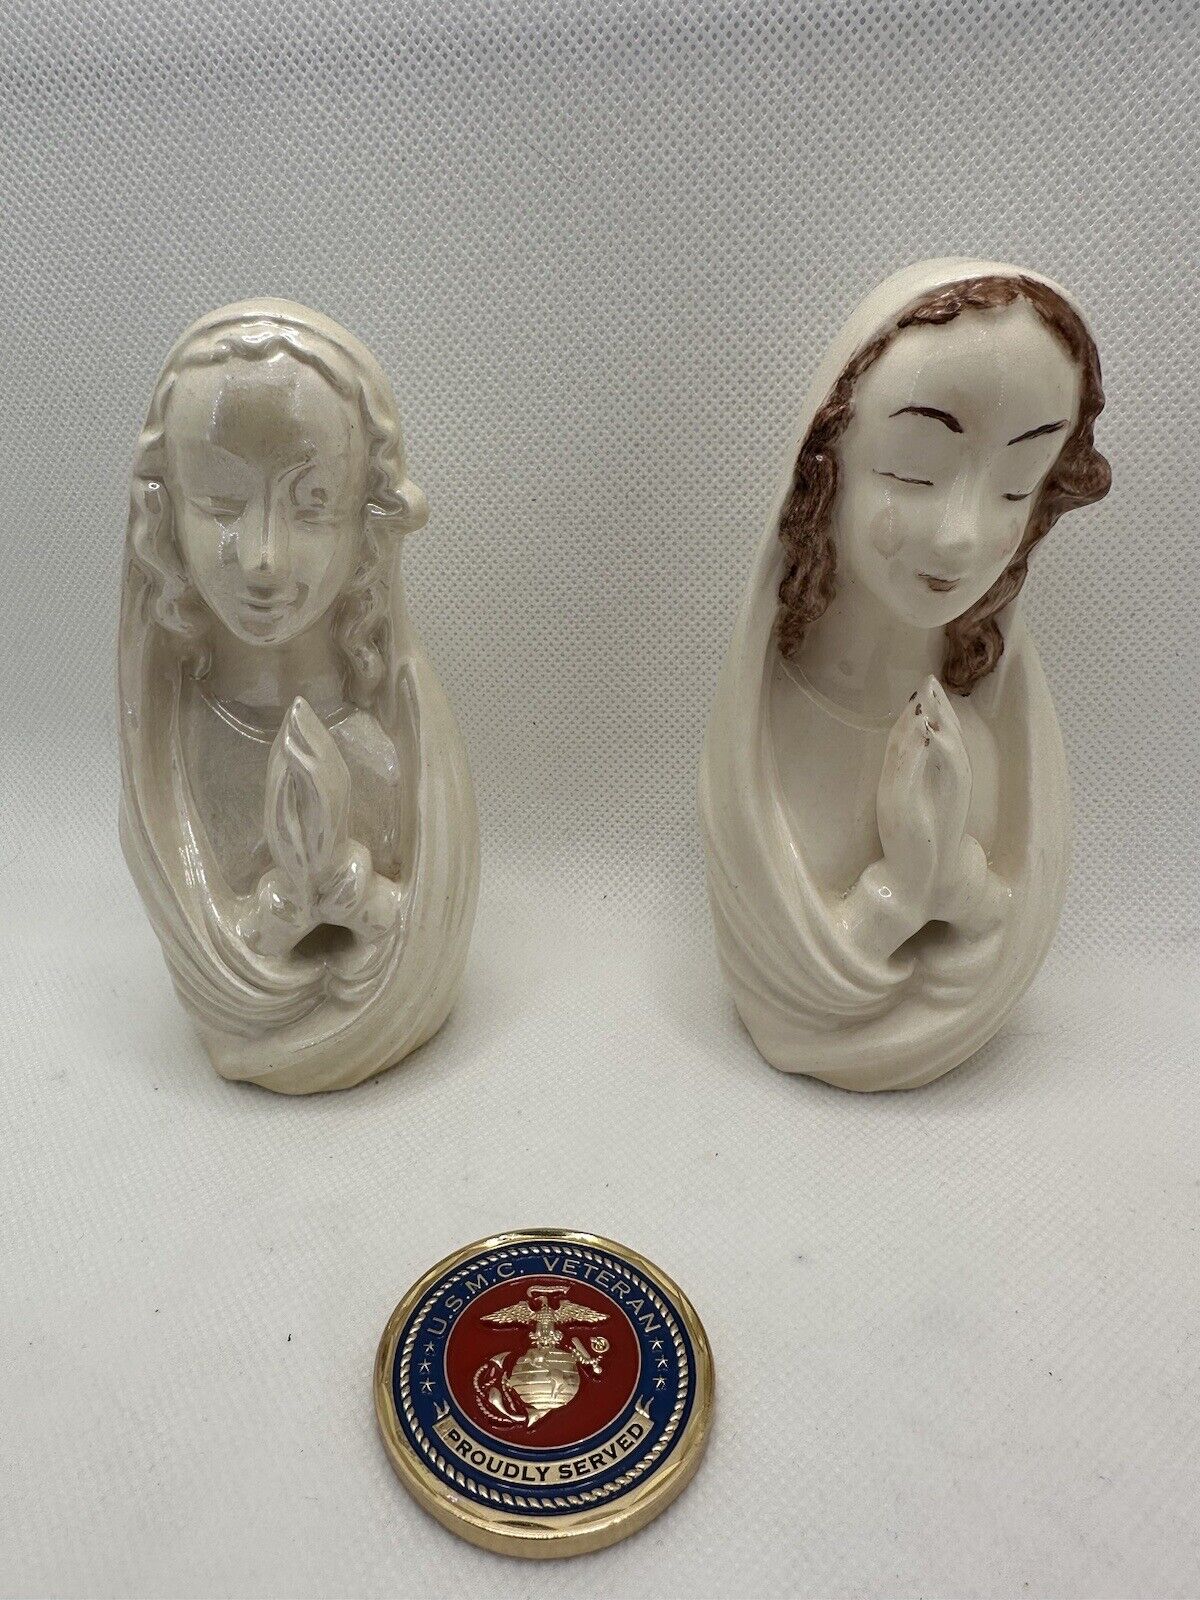 2 Vintage Miniature Madonna Figurines- White And Painted Set Lot Mary Statuettes